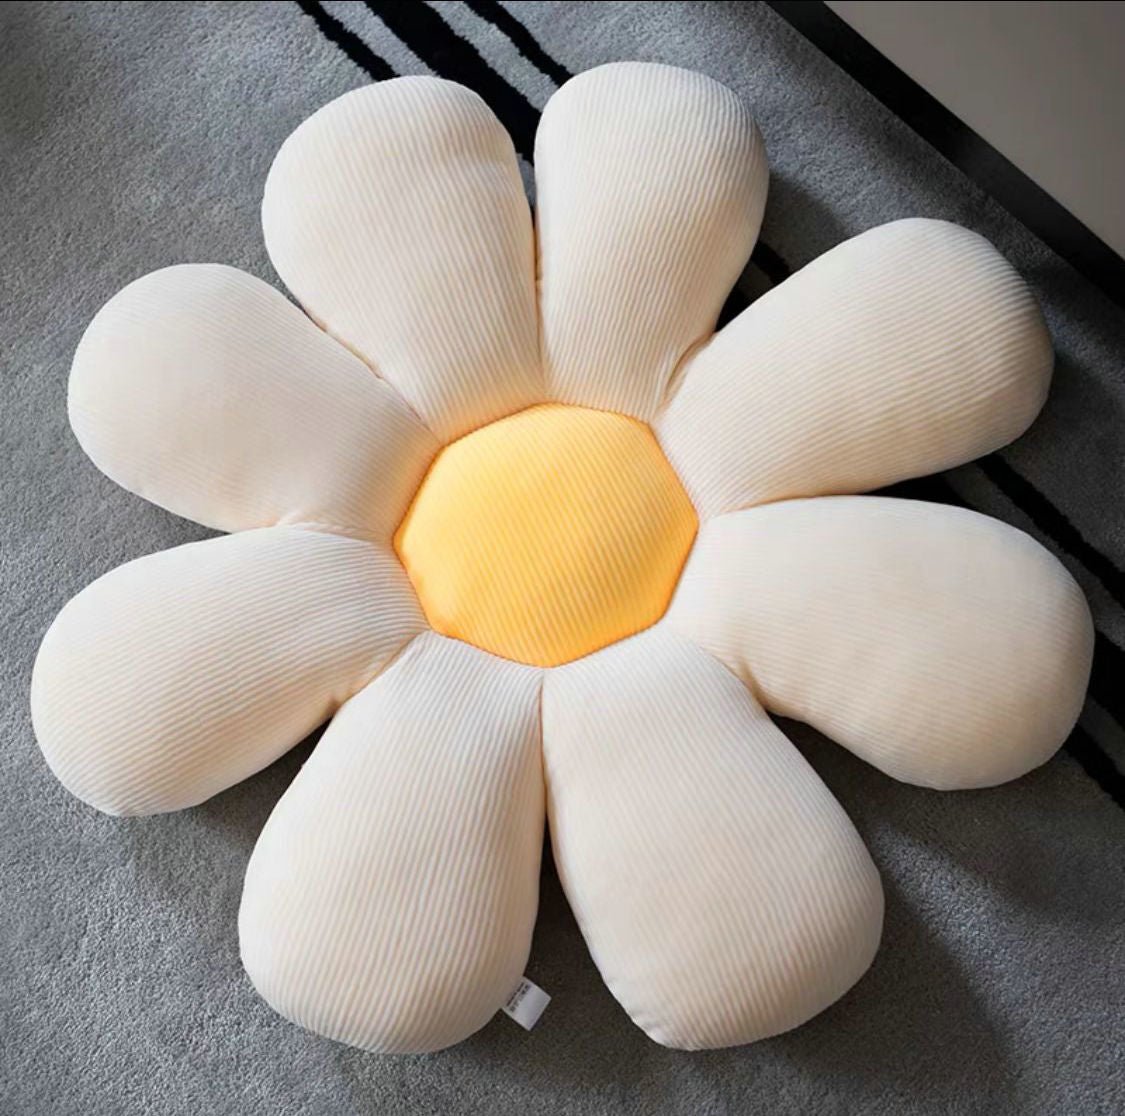 Add Decorative Flair to Your Home with Our Soft and Comfortable Flower Floor Pillows - Perfect for Any Room!